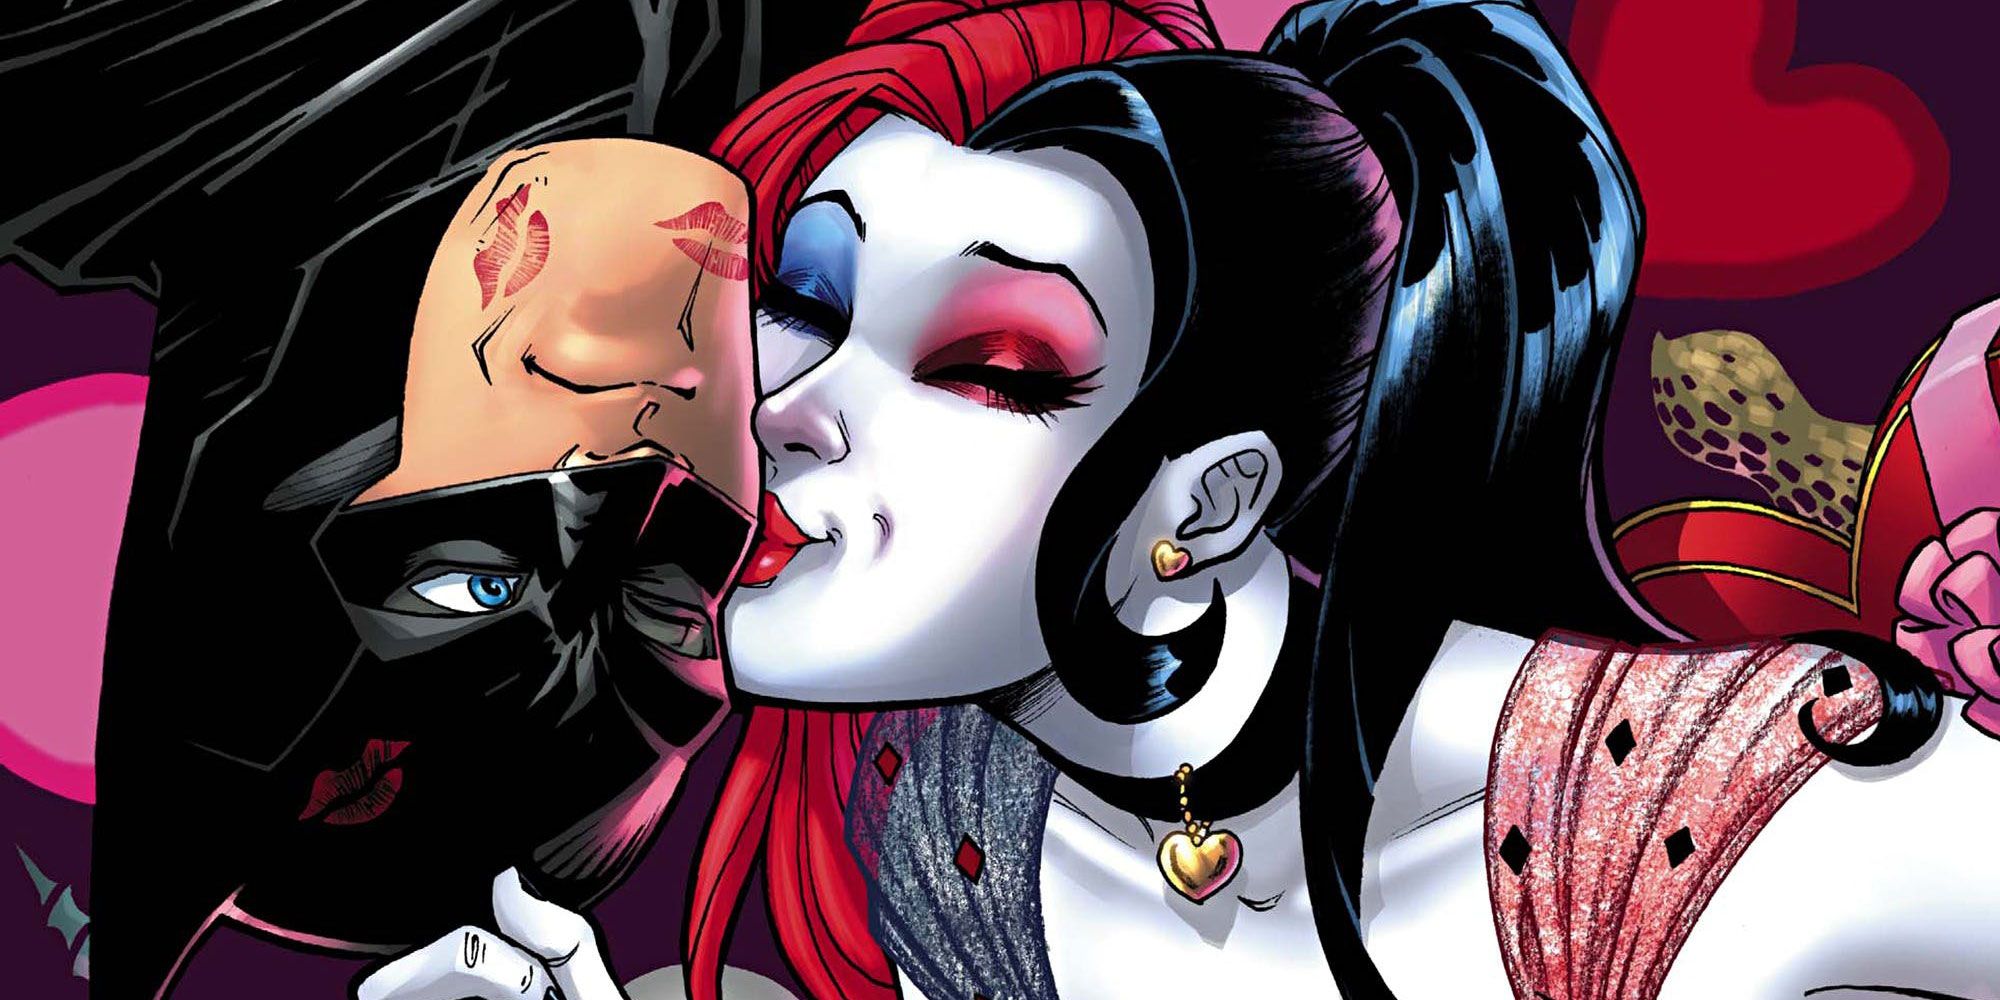 Batman #42 Pushes Harley Quinn into the Center of the DC Universe